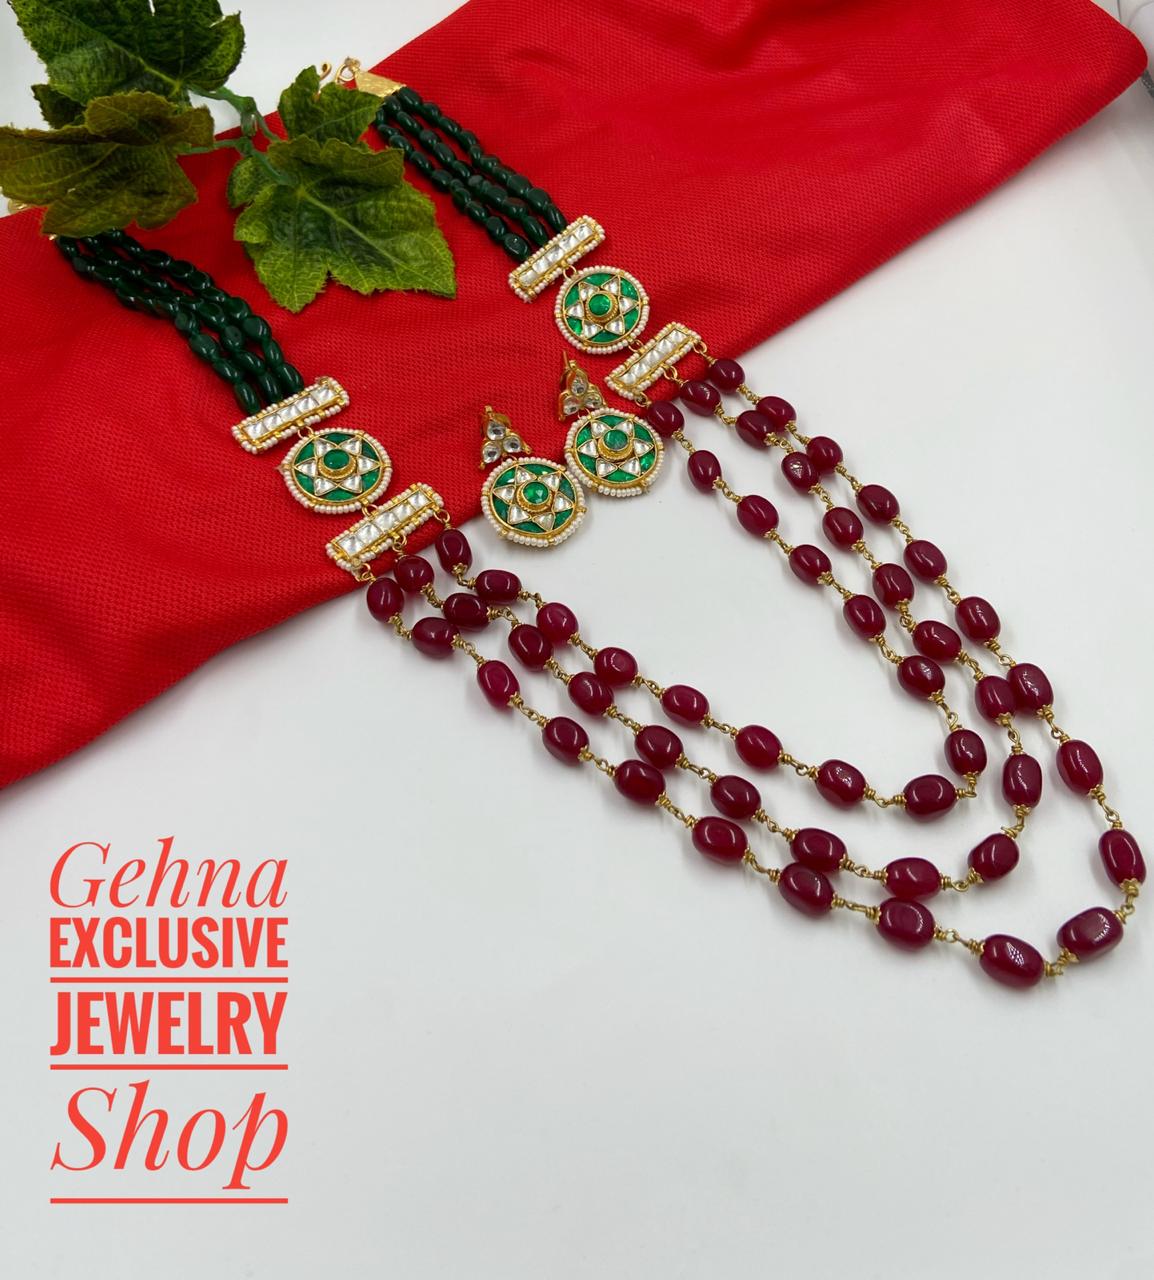 Designer Traditional Triple layered Red Jade Beads Necklace Set By Gehna Shop Beads Jewellery